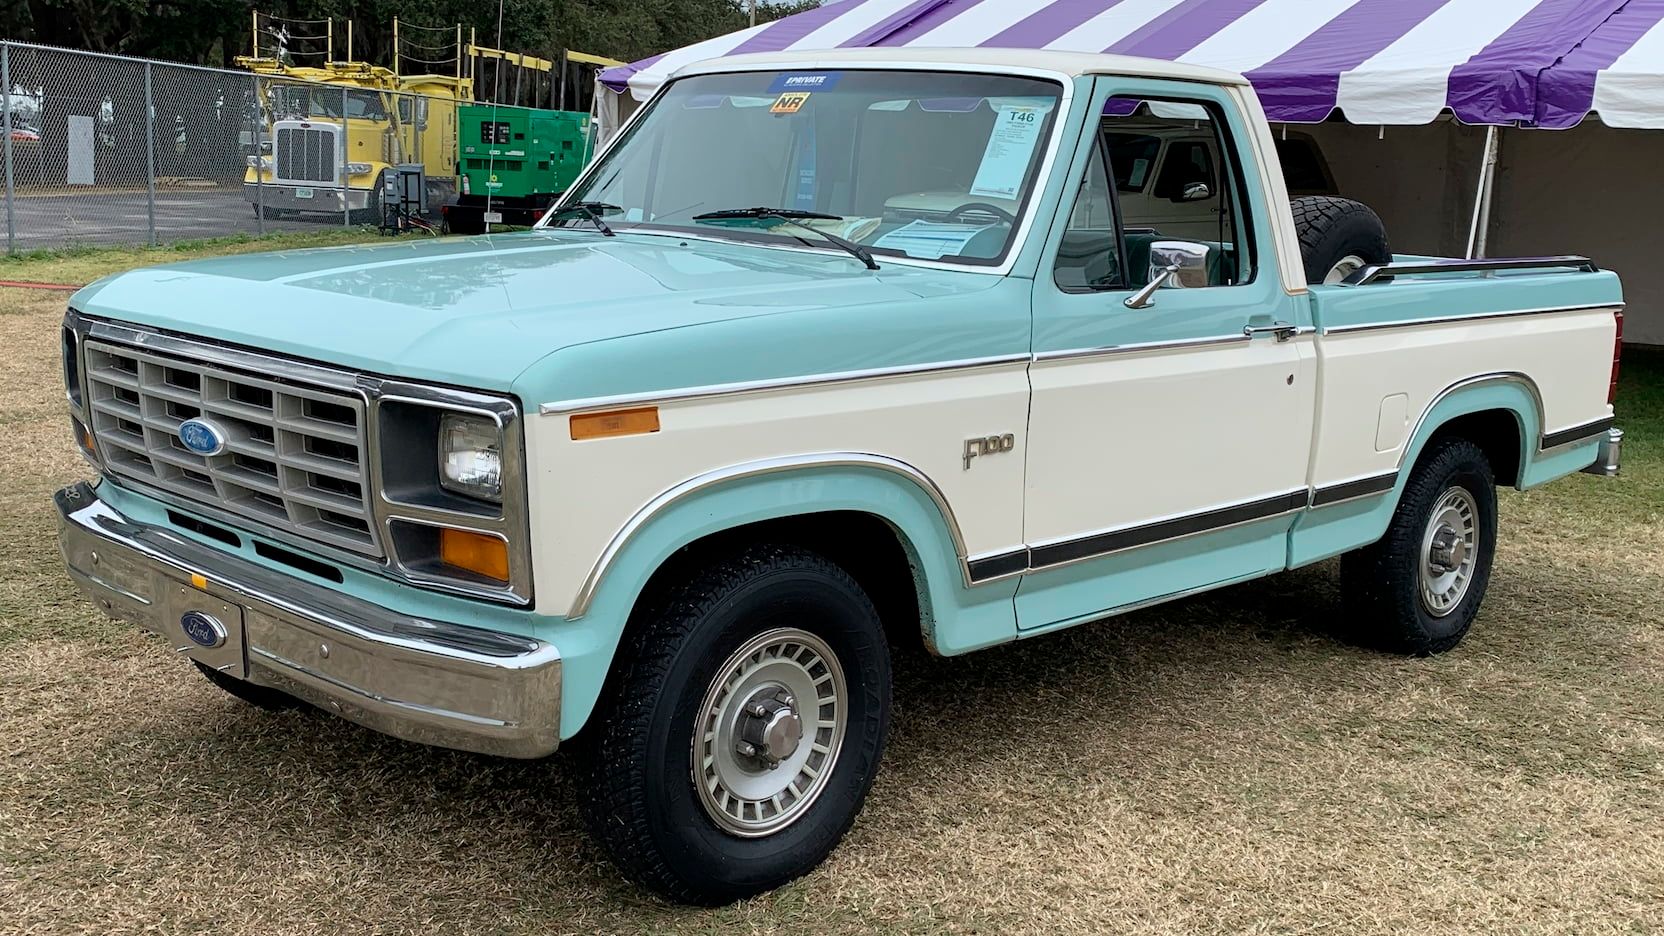 A parked 1982 Ford F100